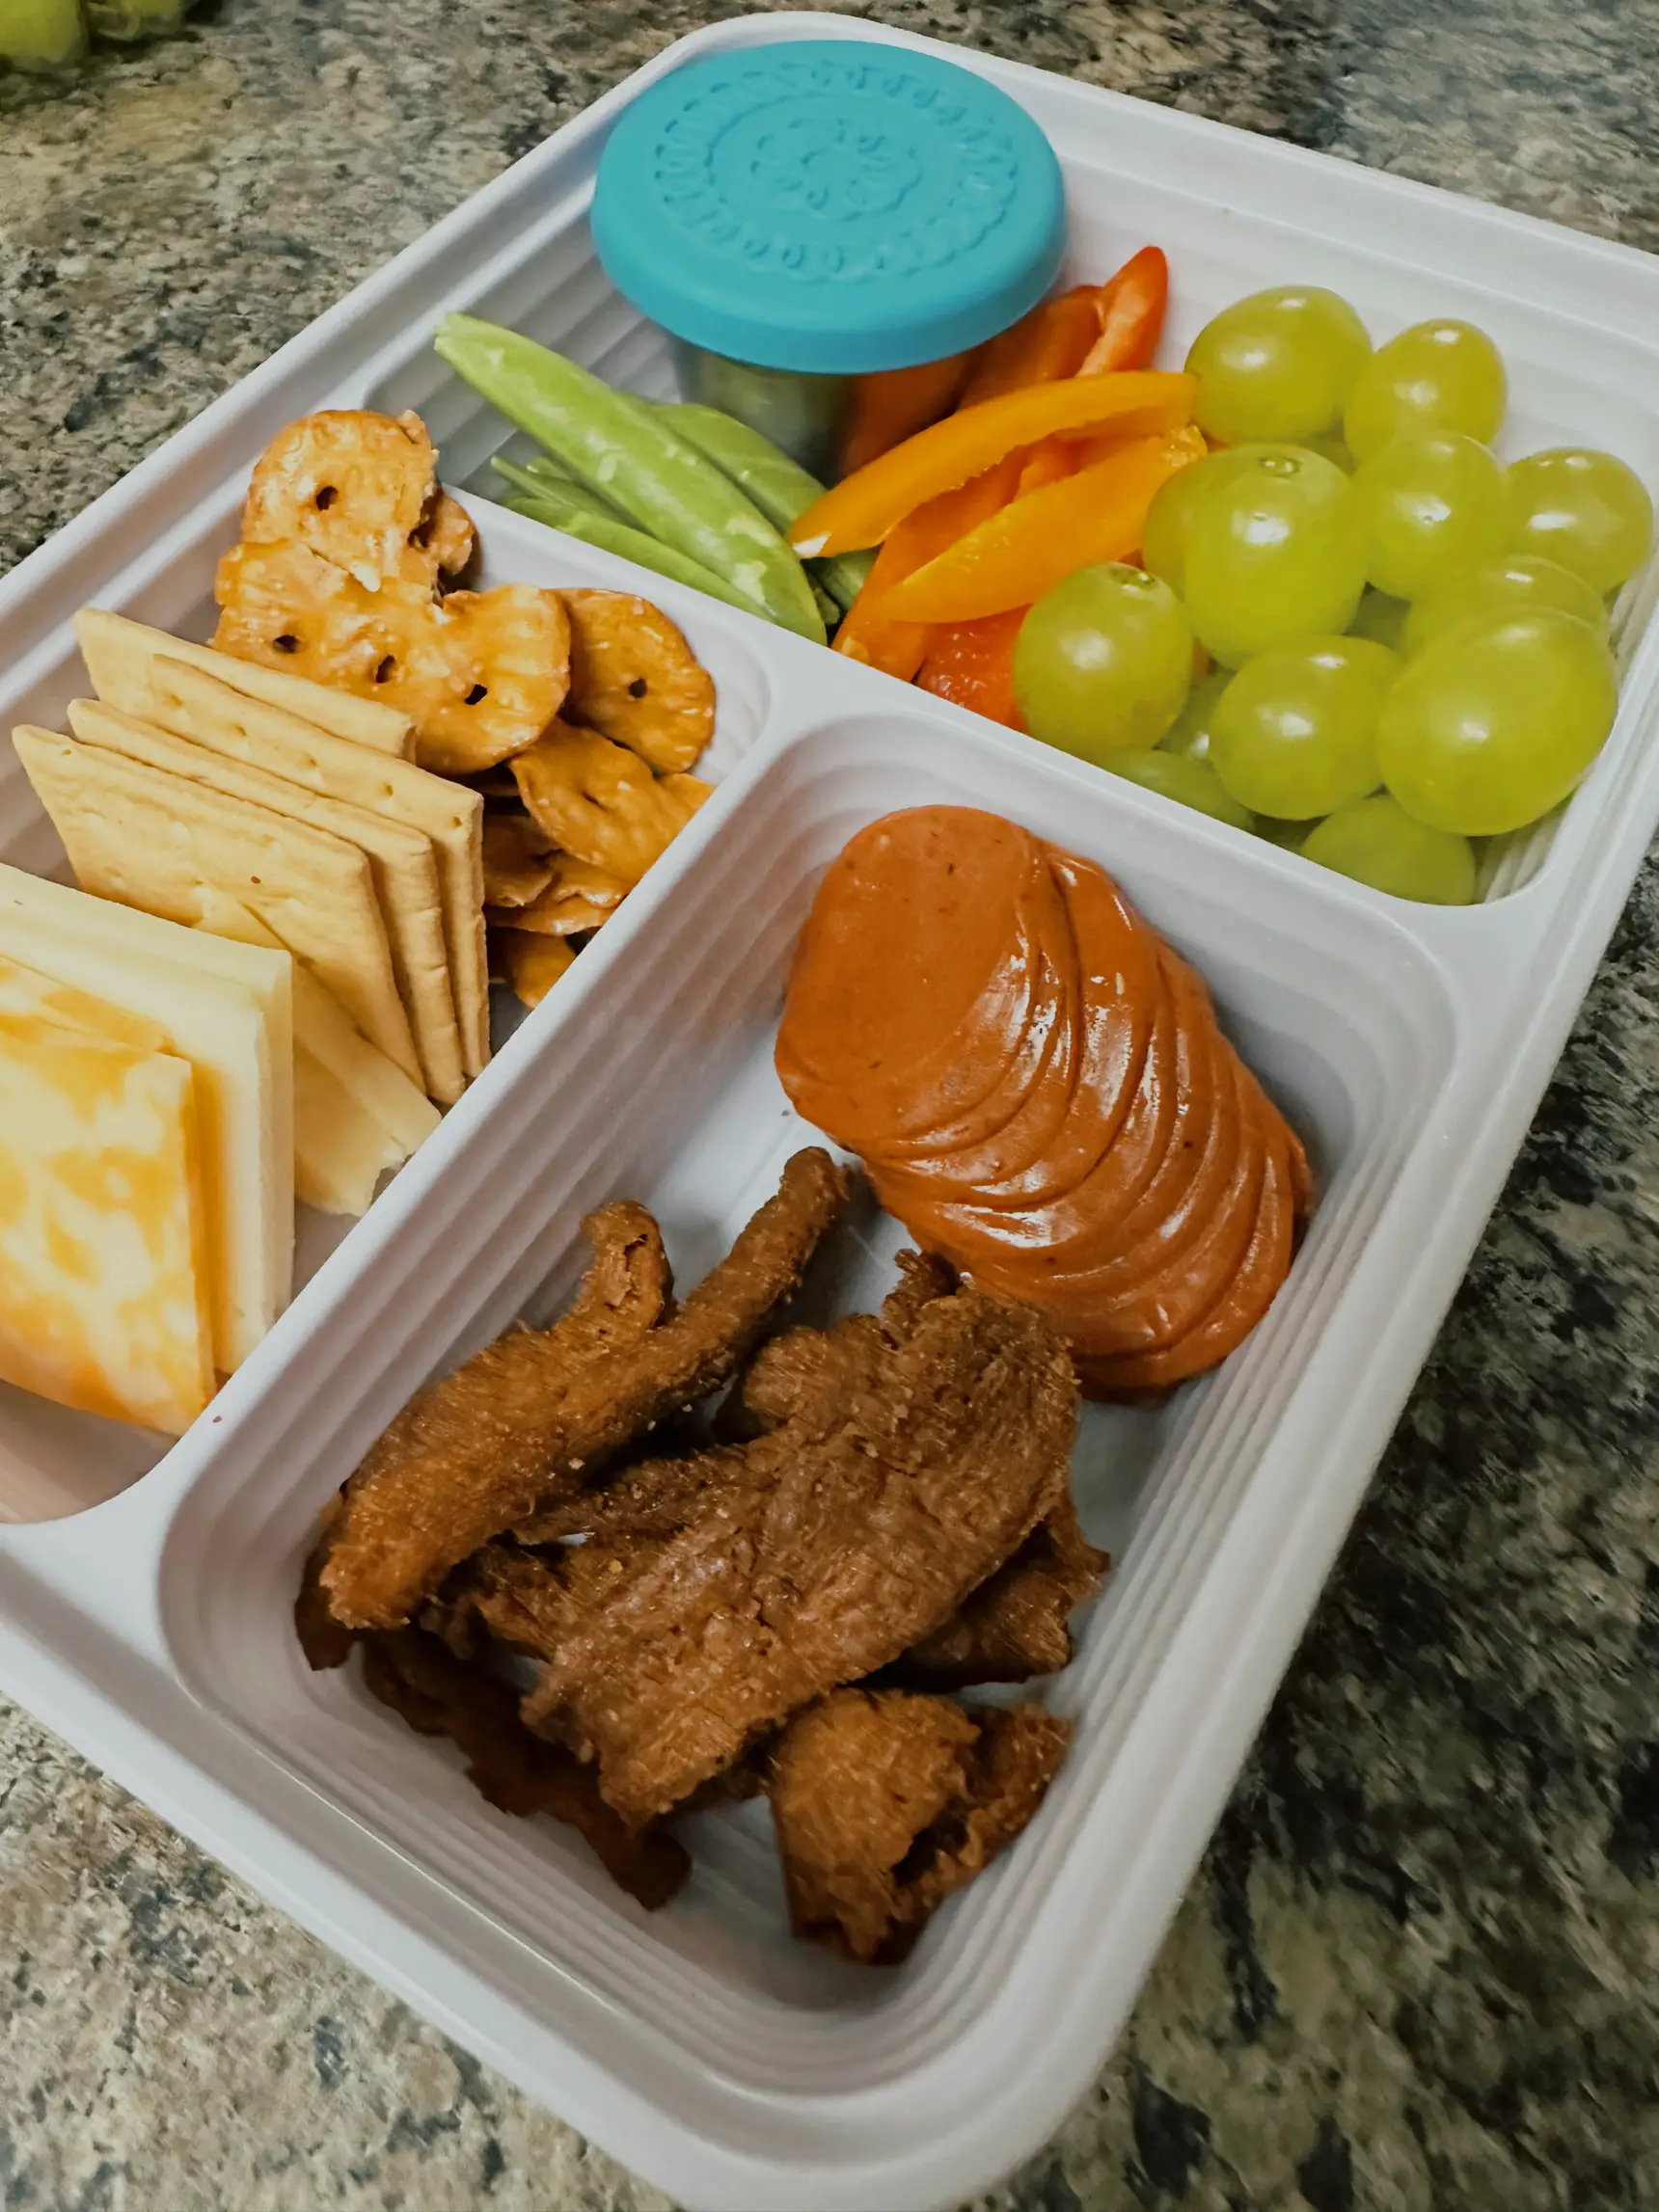 Meal Prep Lunchables - Carmy - Easy Healthy-ish Recipes